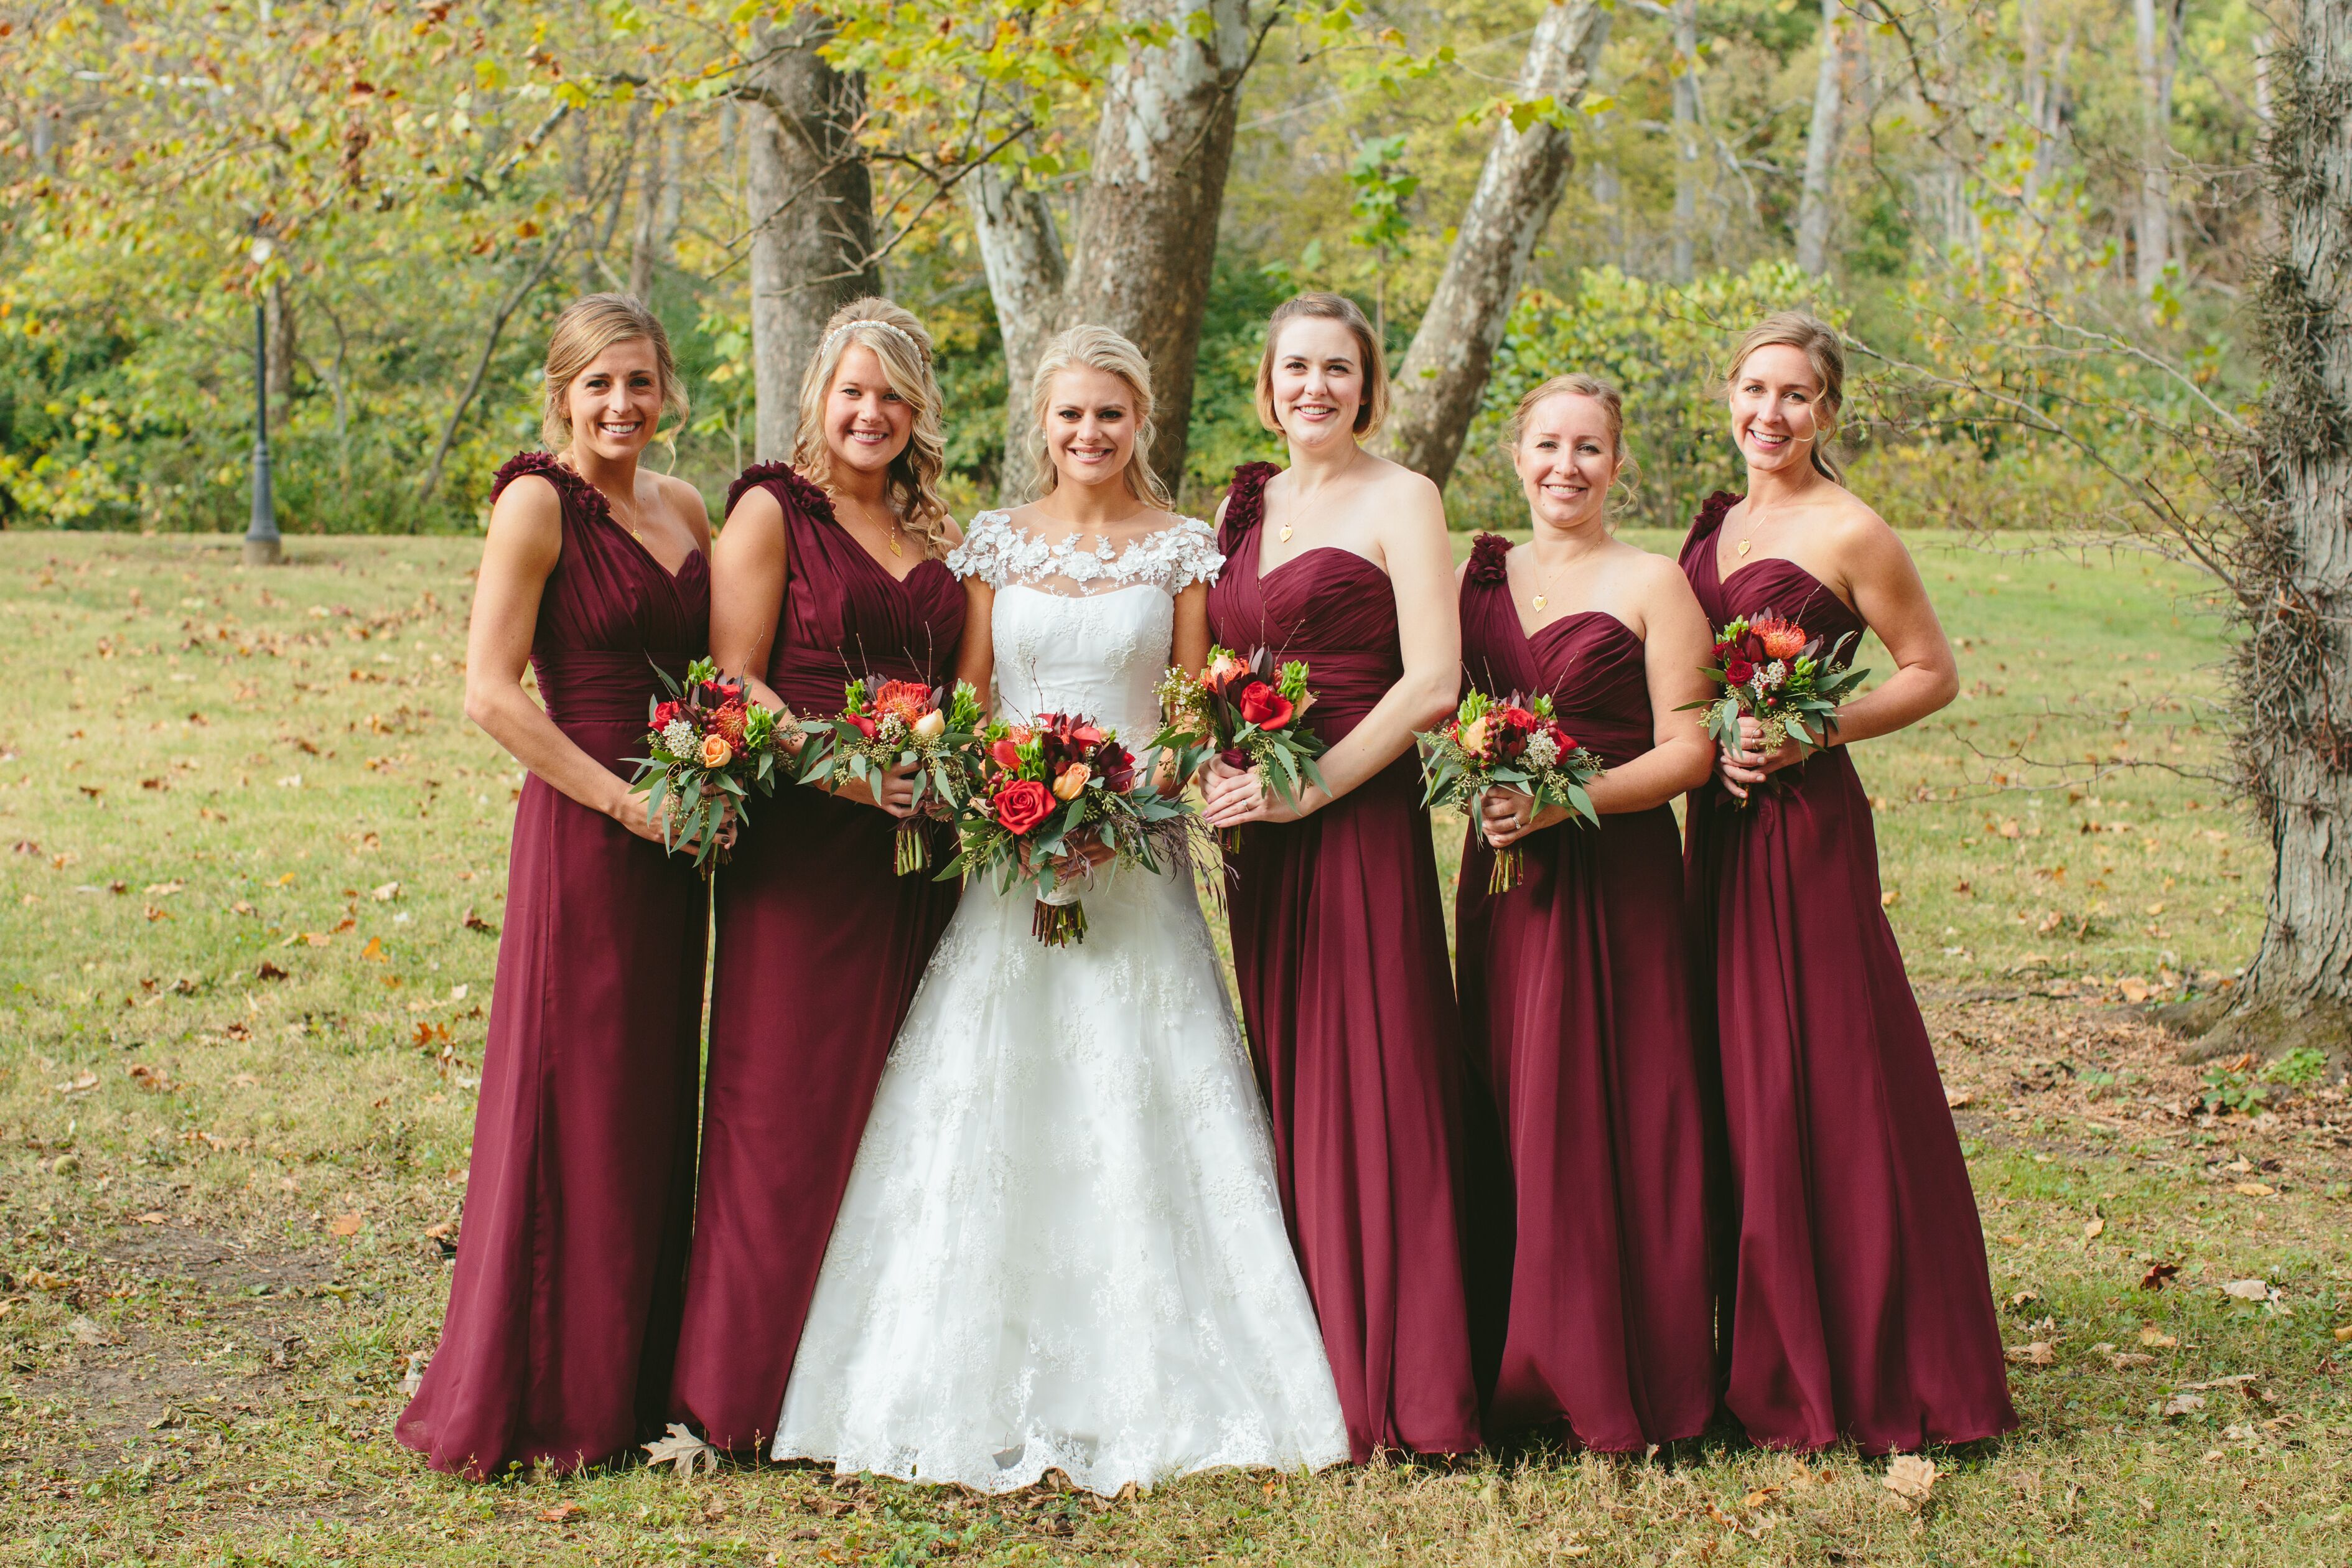 6. "The Perfect Nail Color for a Burgundy Bridesmaid Dress" - wide 8